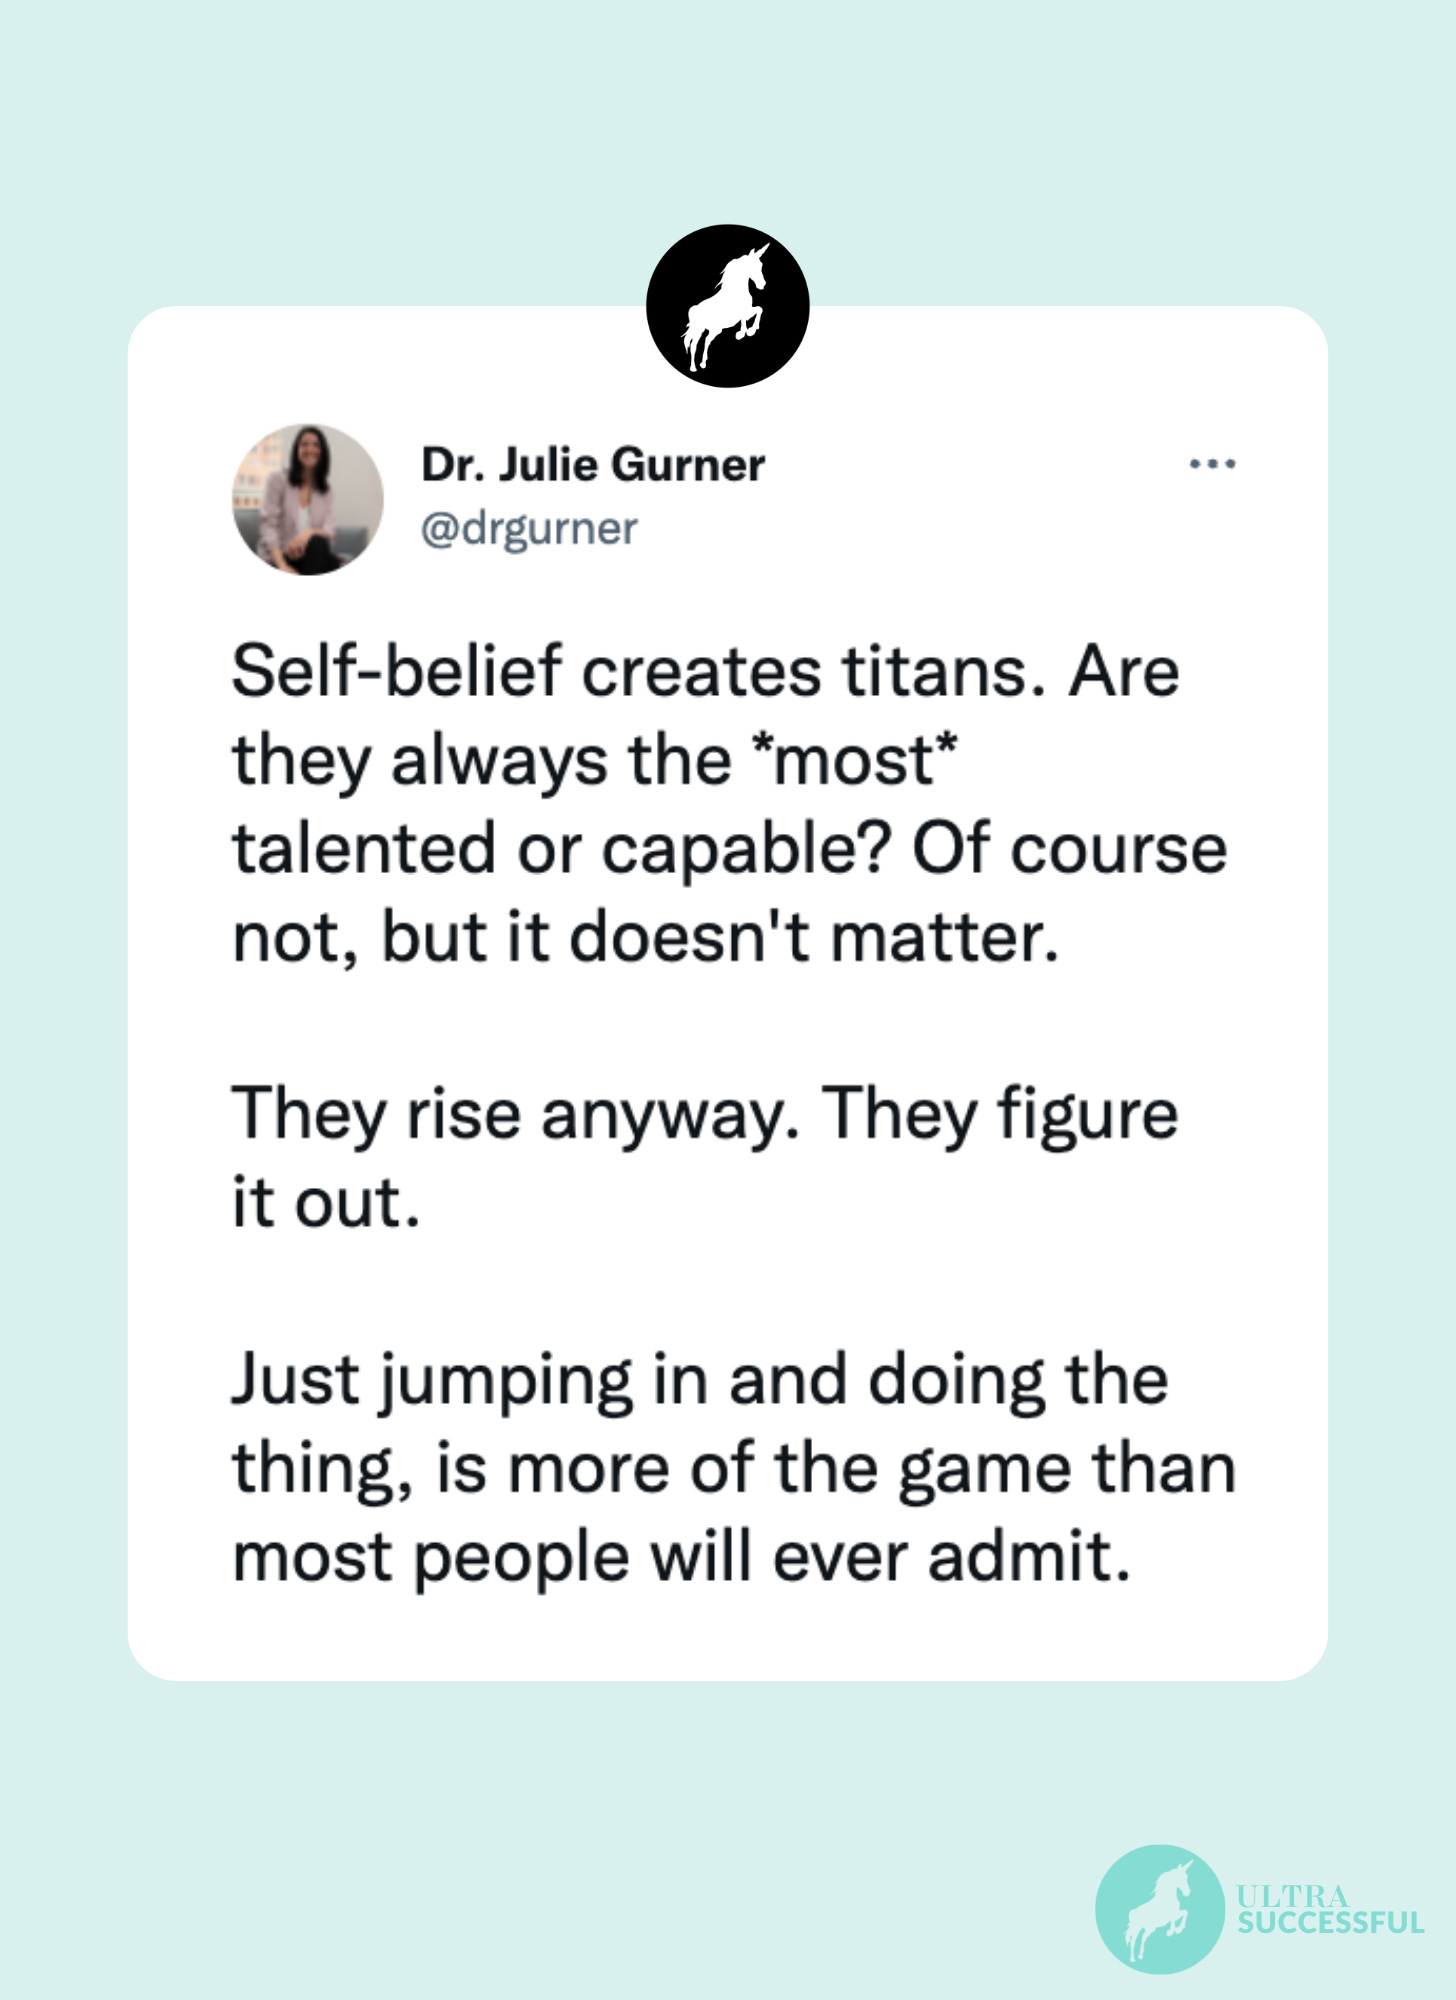 @drgurner: Self-belief creates titans. Are they always the *most* talented or capable? Of course not, but it doesn't matter.   They rise anyway. They figure it out.  Just jumping in and doing the thing, is more of the game than most people will ever admit.